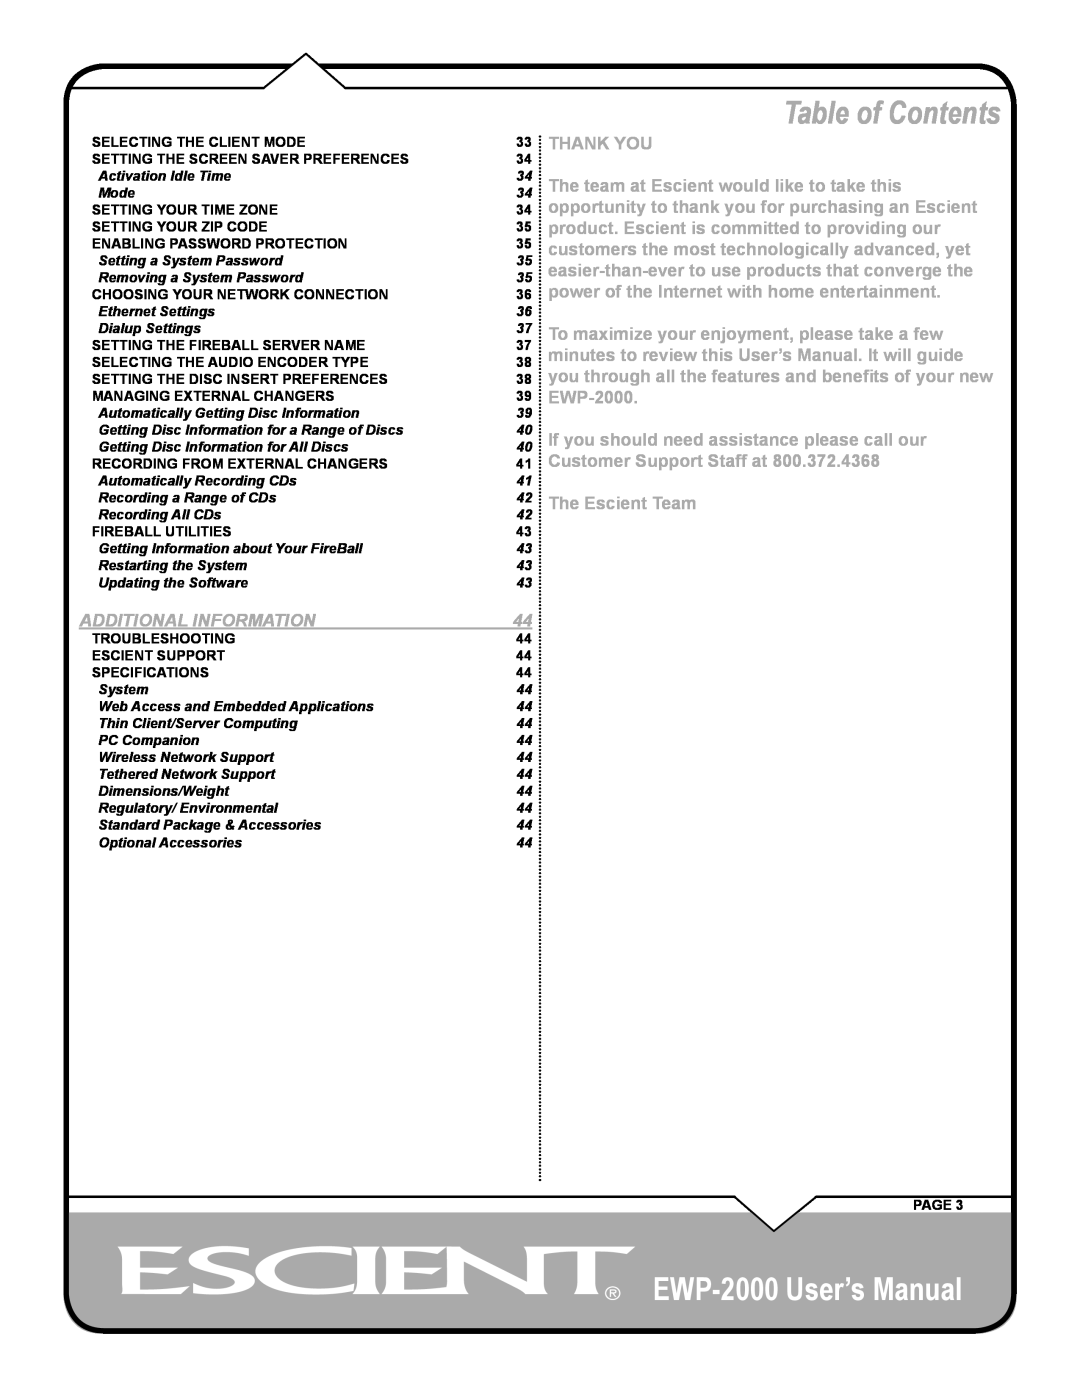 Escient user manual Table of Contents, EWP-2000 User’s Manual, Additional Information 